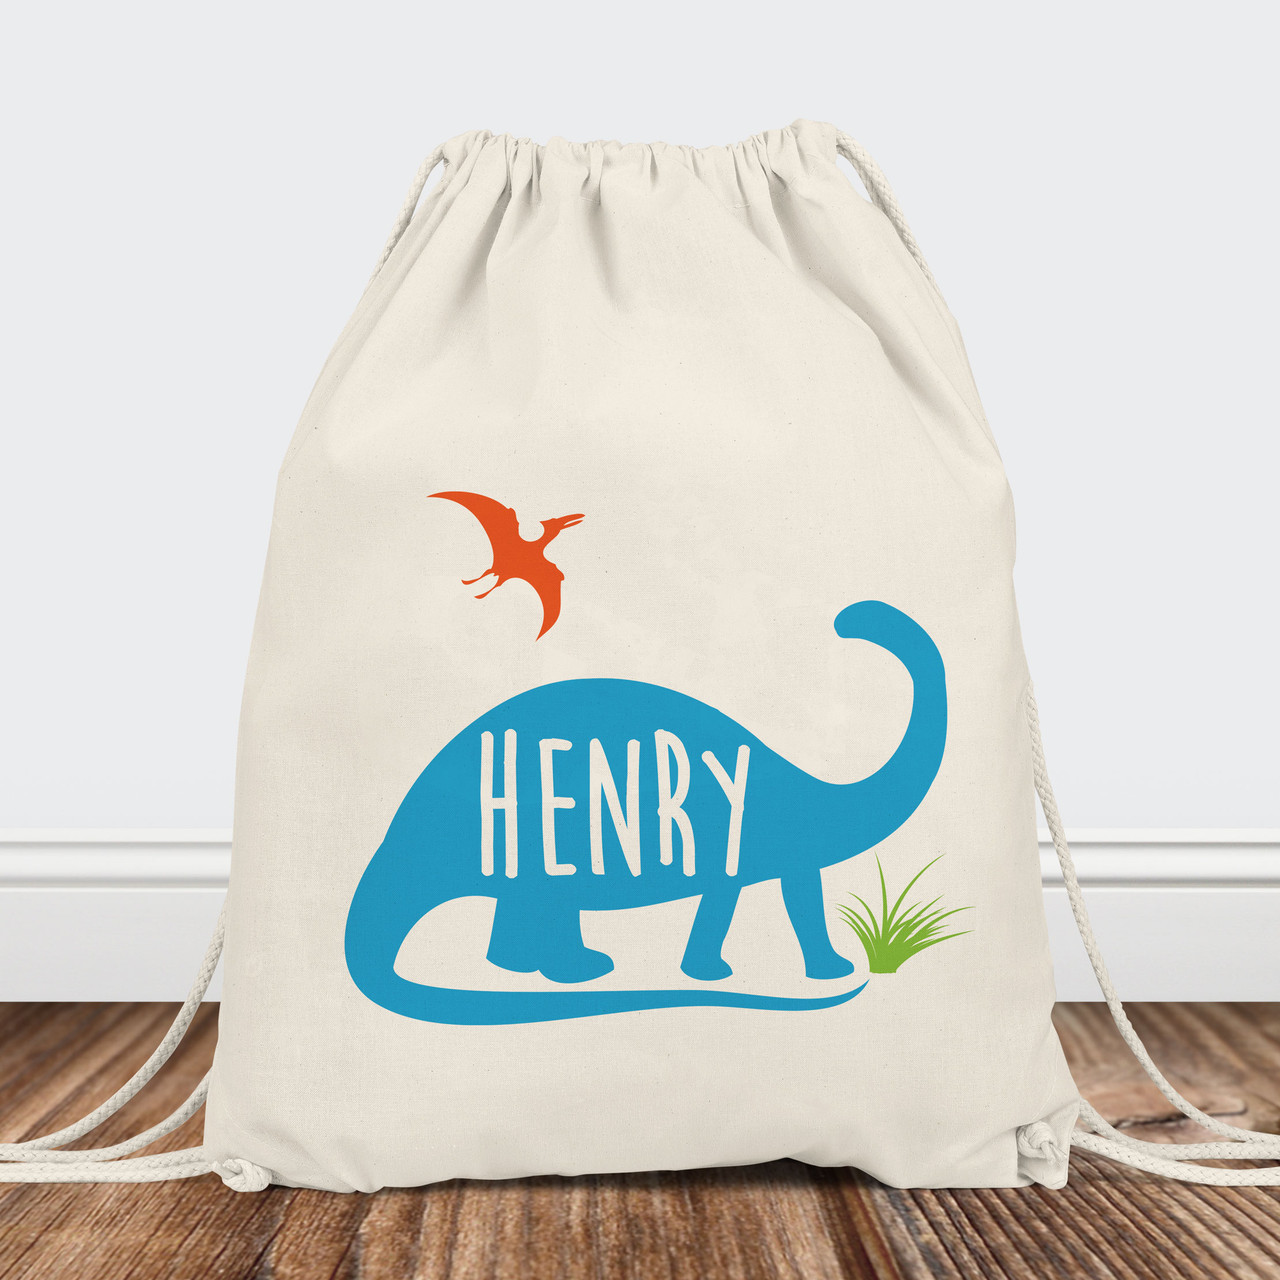 https://cdn11.bigcommerce.com/s-5grzuu6/images/stencil/1280x1280/products/2908/48343/Dinosaur_Kids_Personalized-Drawstring-Backpack-Blue__33025.1654554582.jpg?c=2